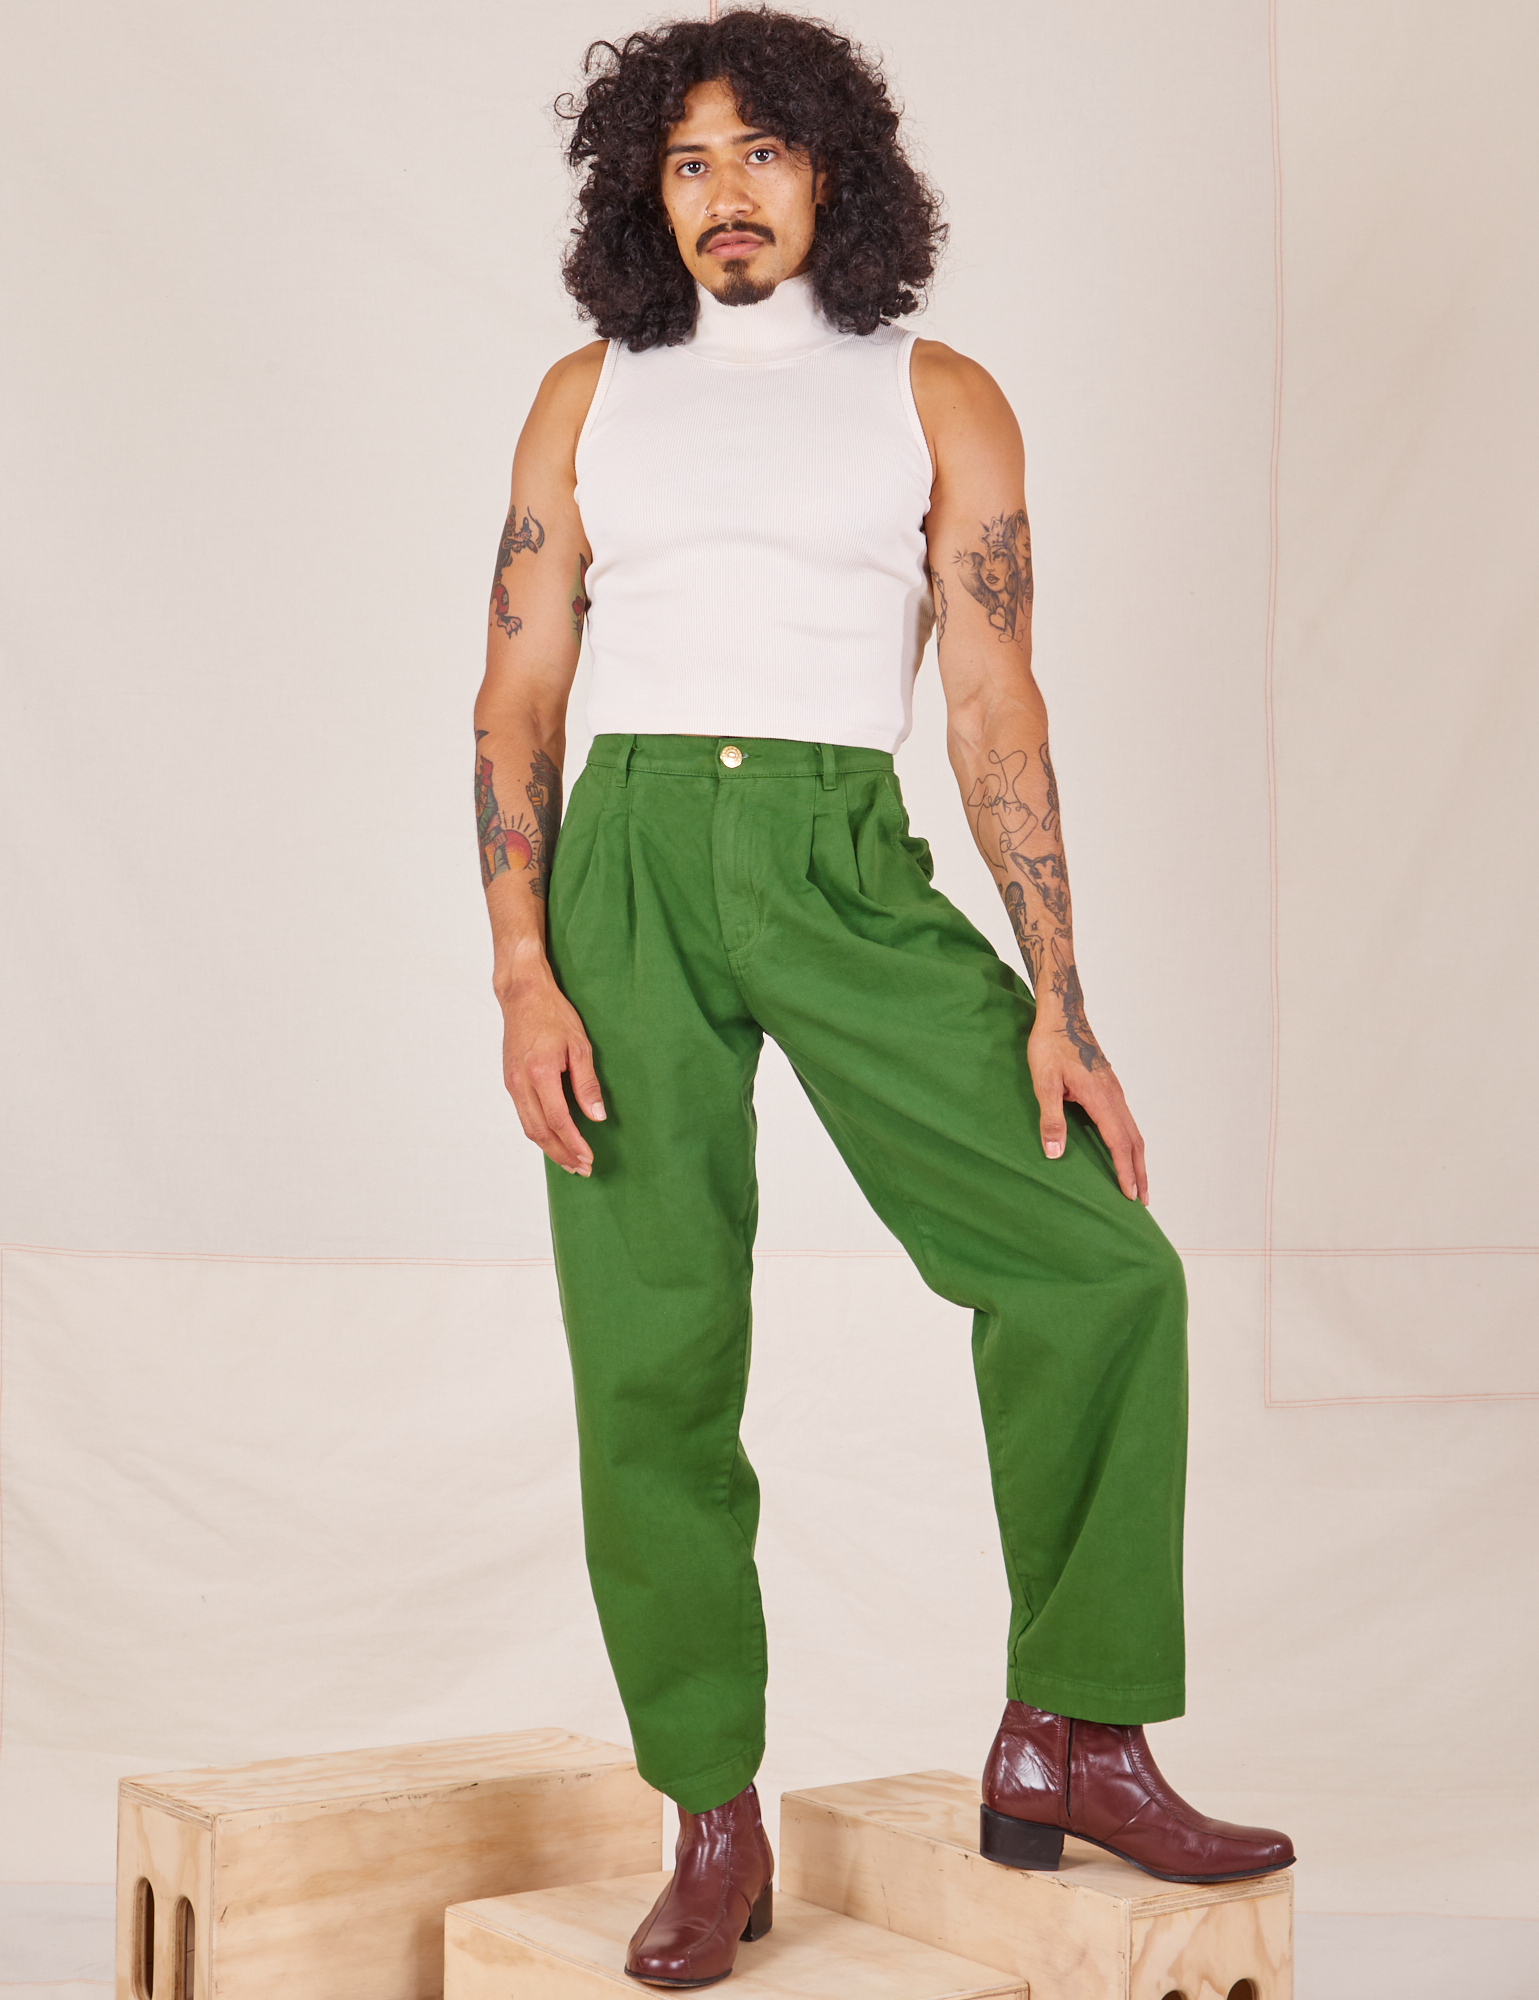 Jesse is 5&#39;8&quot; and wearing XXS Heavyweight Trousers in Lawn Green paired with Sleeveless Turtleneck in vintage tee off-white